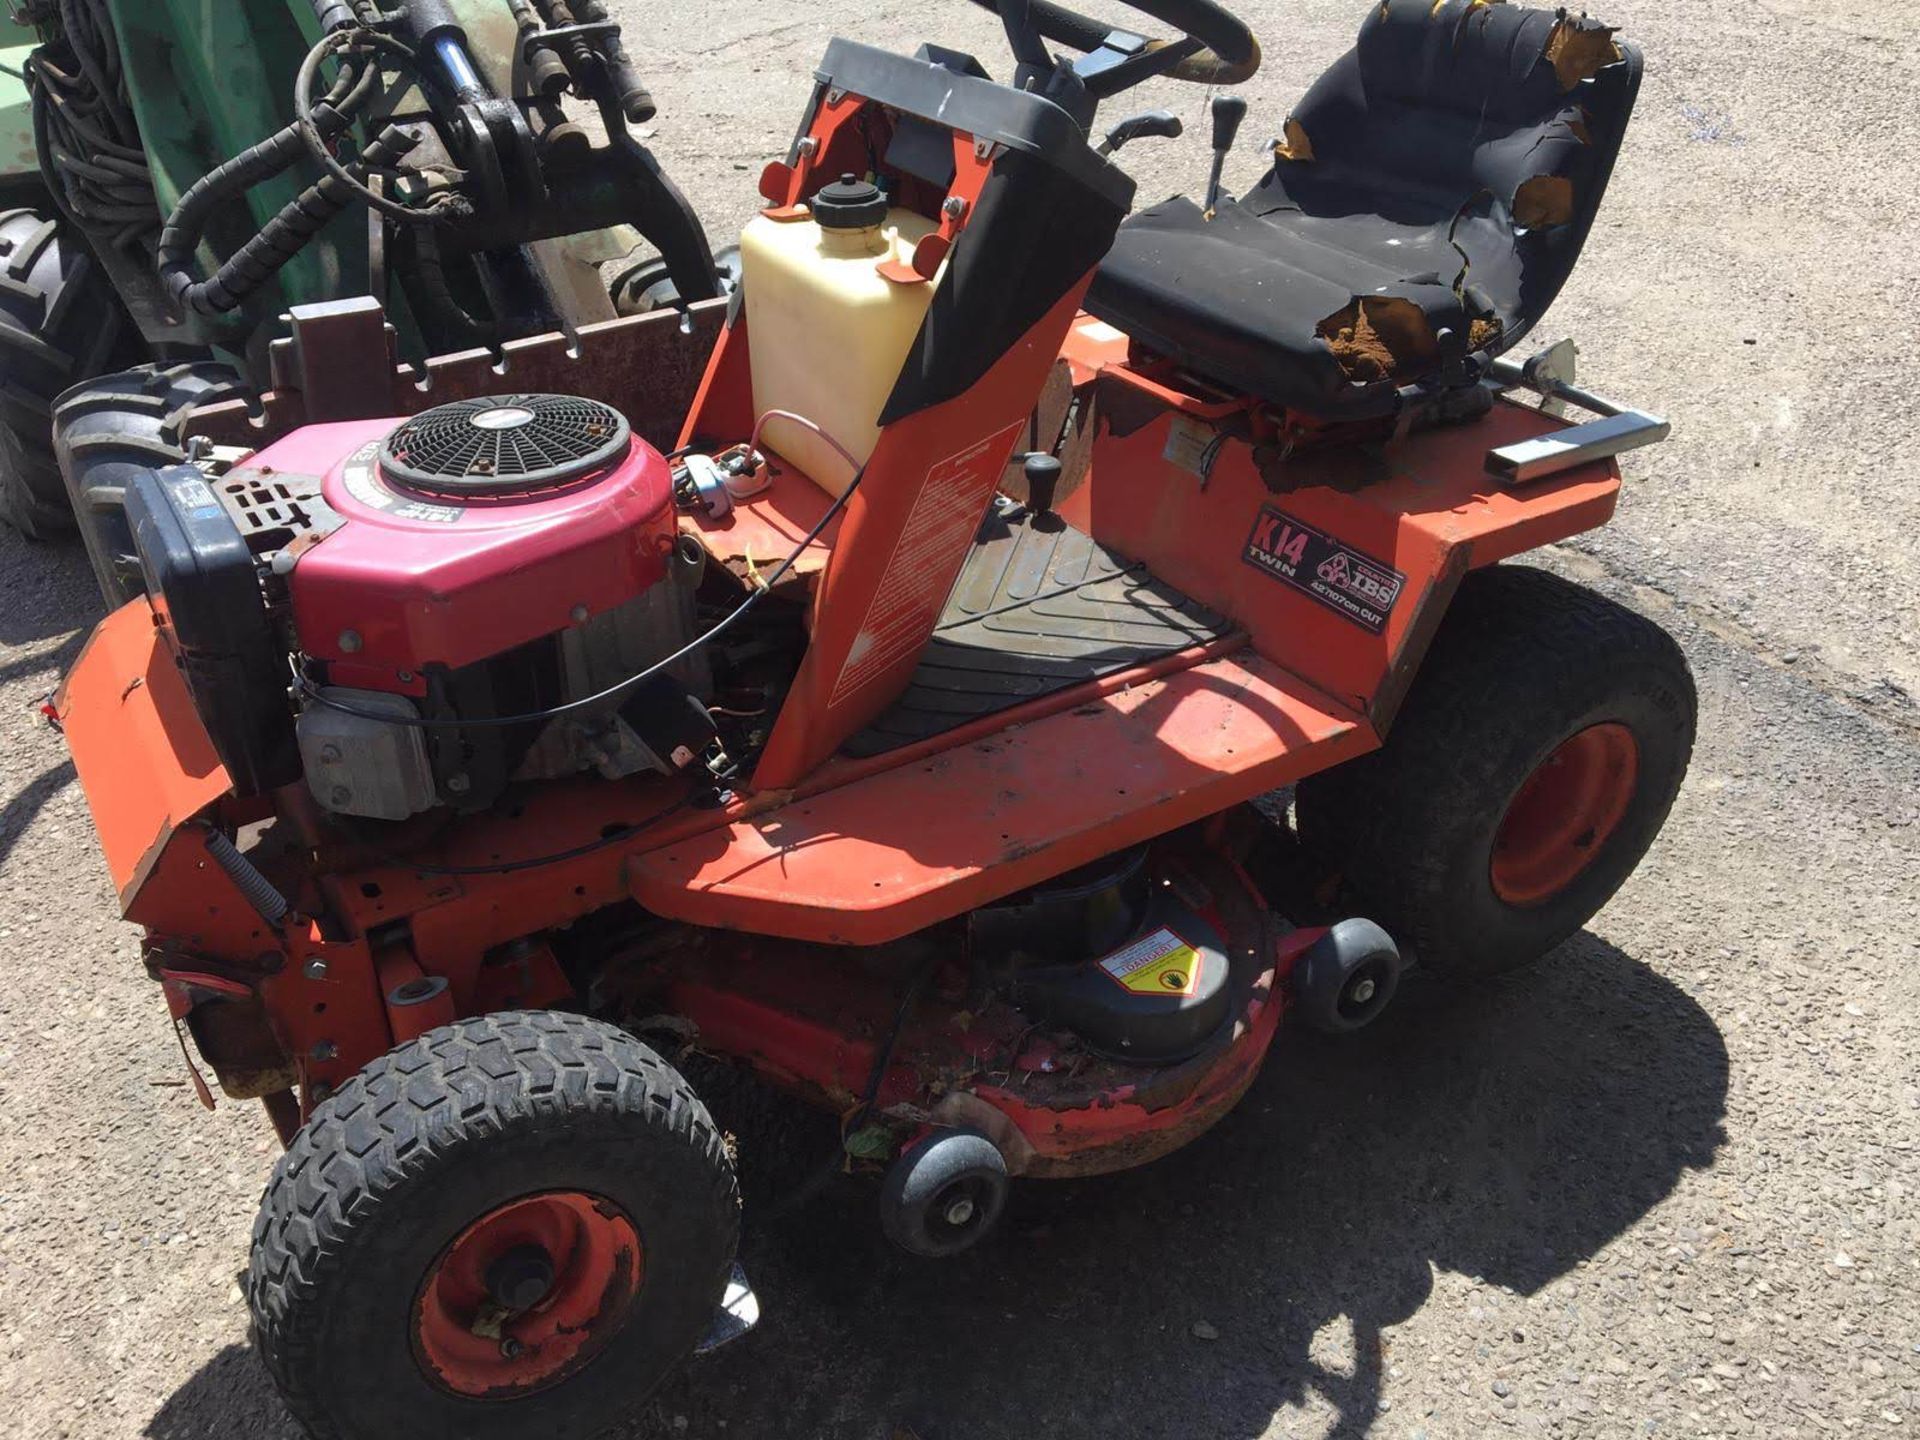 COUNTAX IBS K14 TWIN 42/107CM RIDE ON LAWN MOWER - SELLING AS SPARES / REPAIRS, NO RESERVE! *NO VAT* - Image 4 of 6